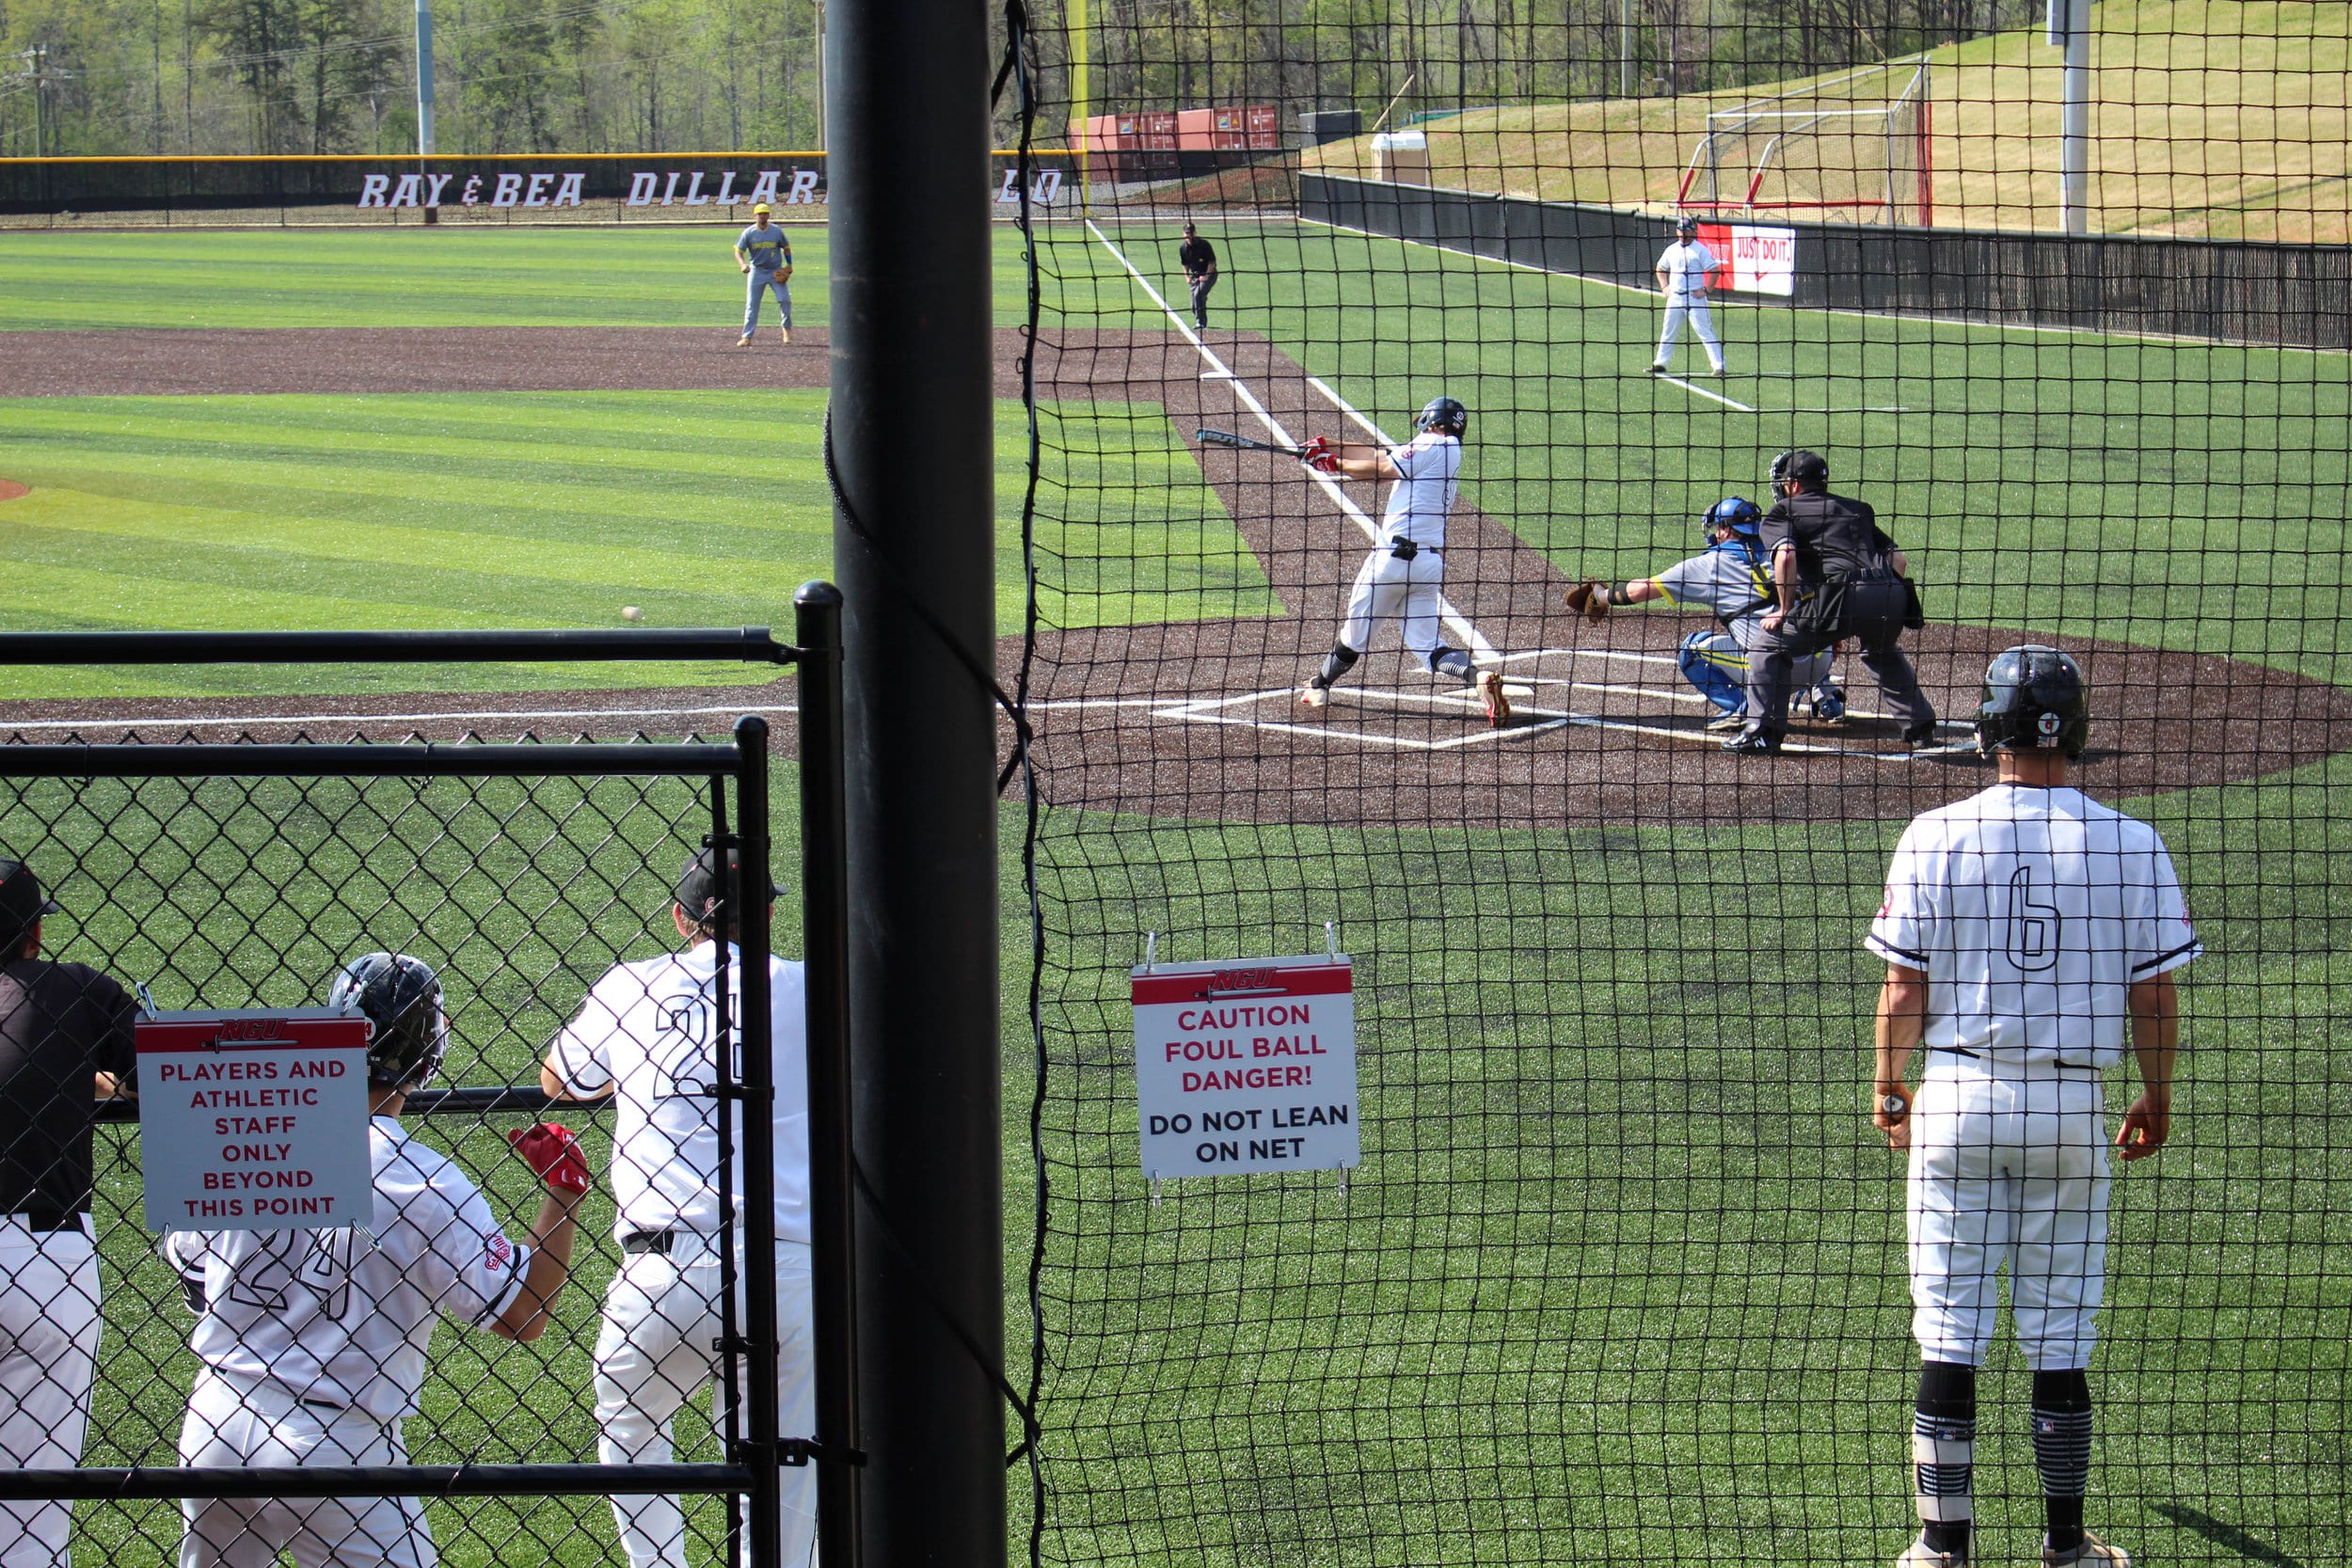 An NGU player hits the ball as Connor Grant stands on deck getting ready to bat next.